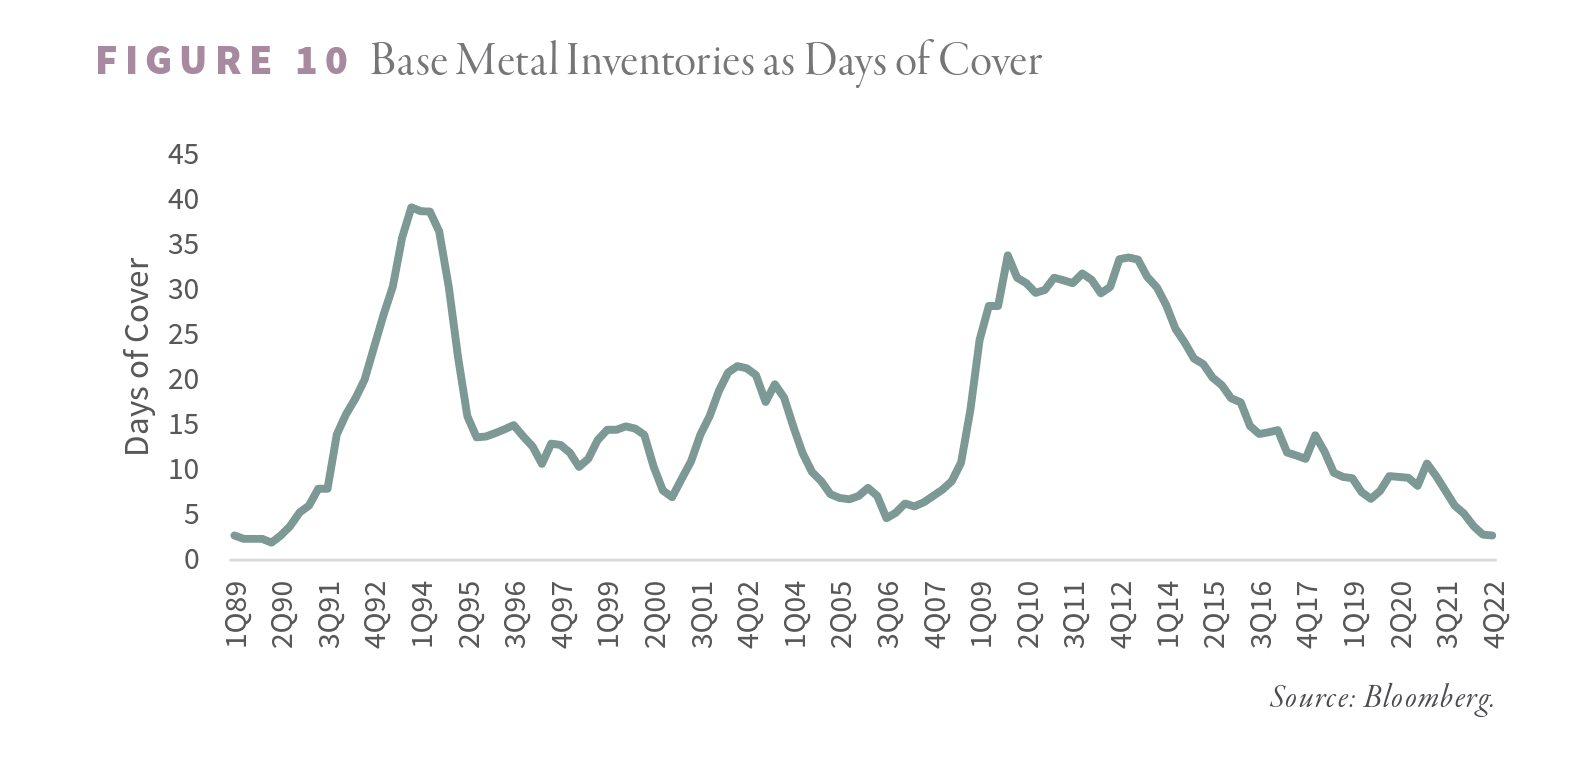 Base Metal Inventories as Days of Cover